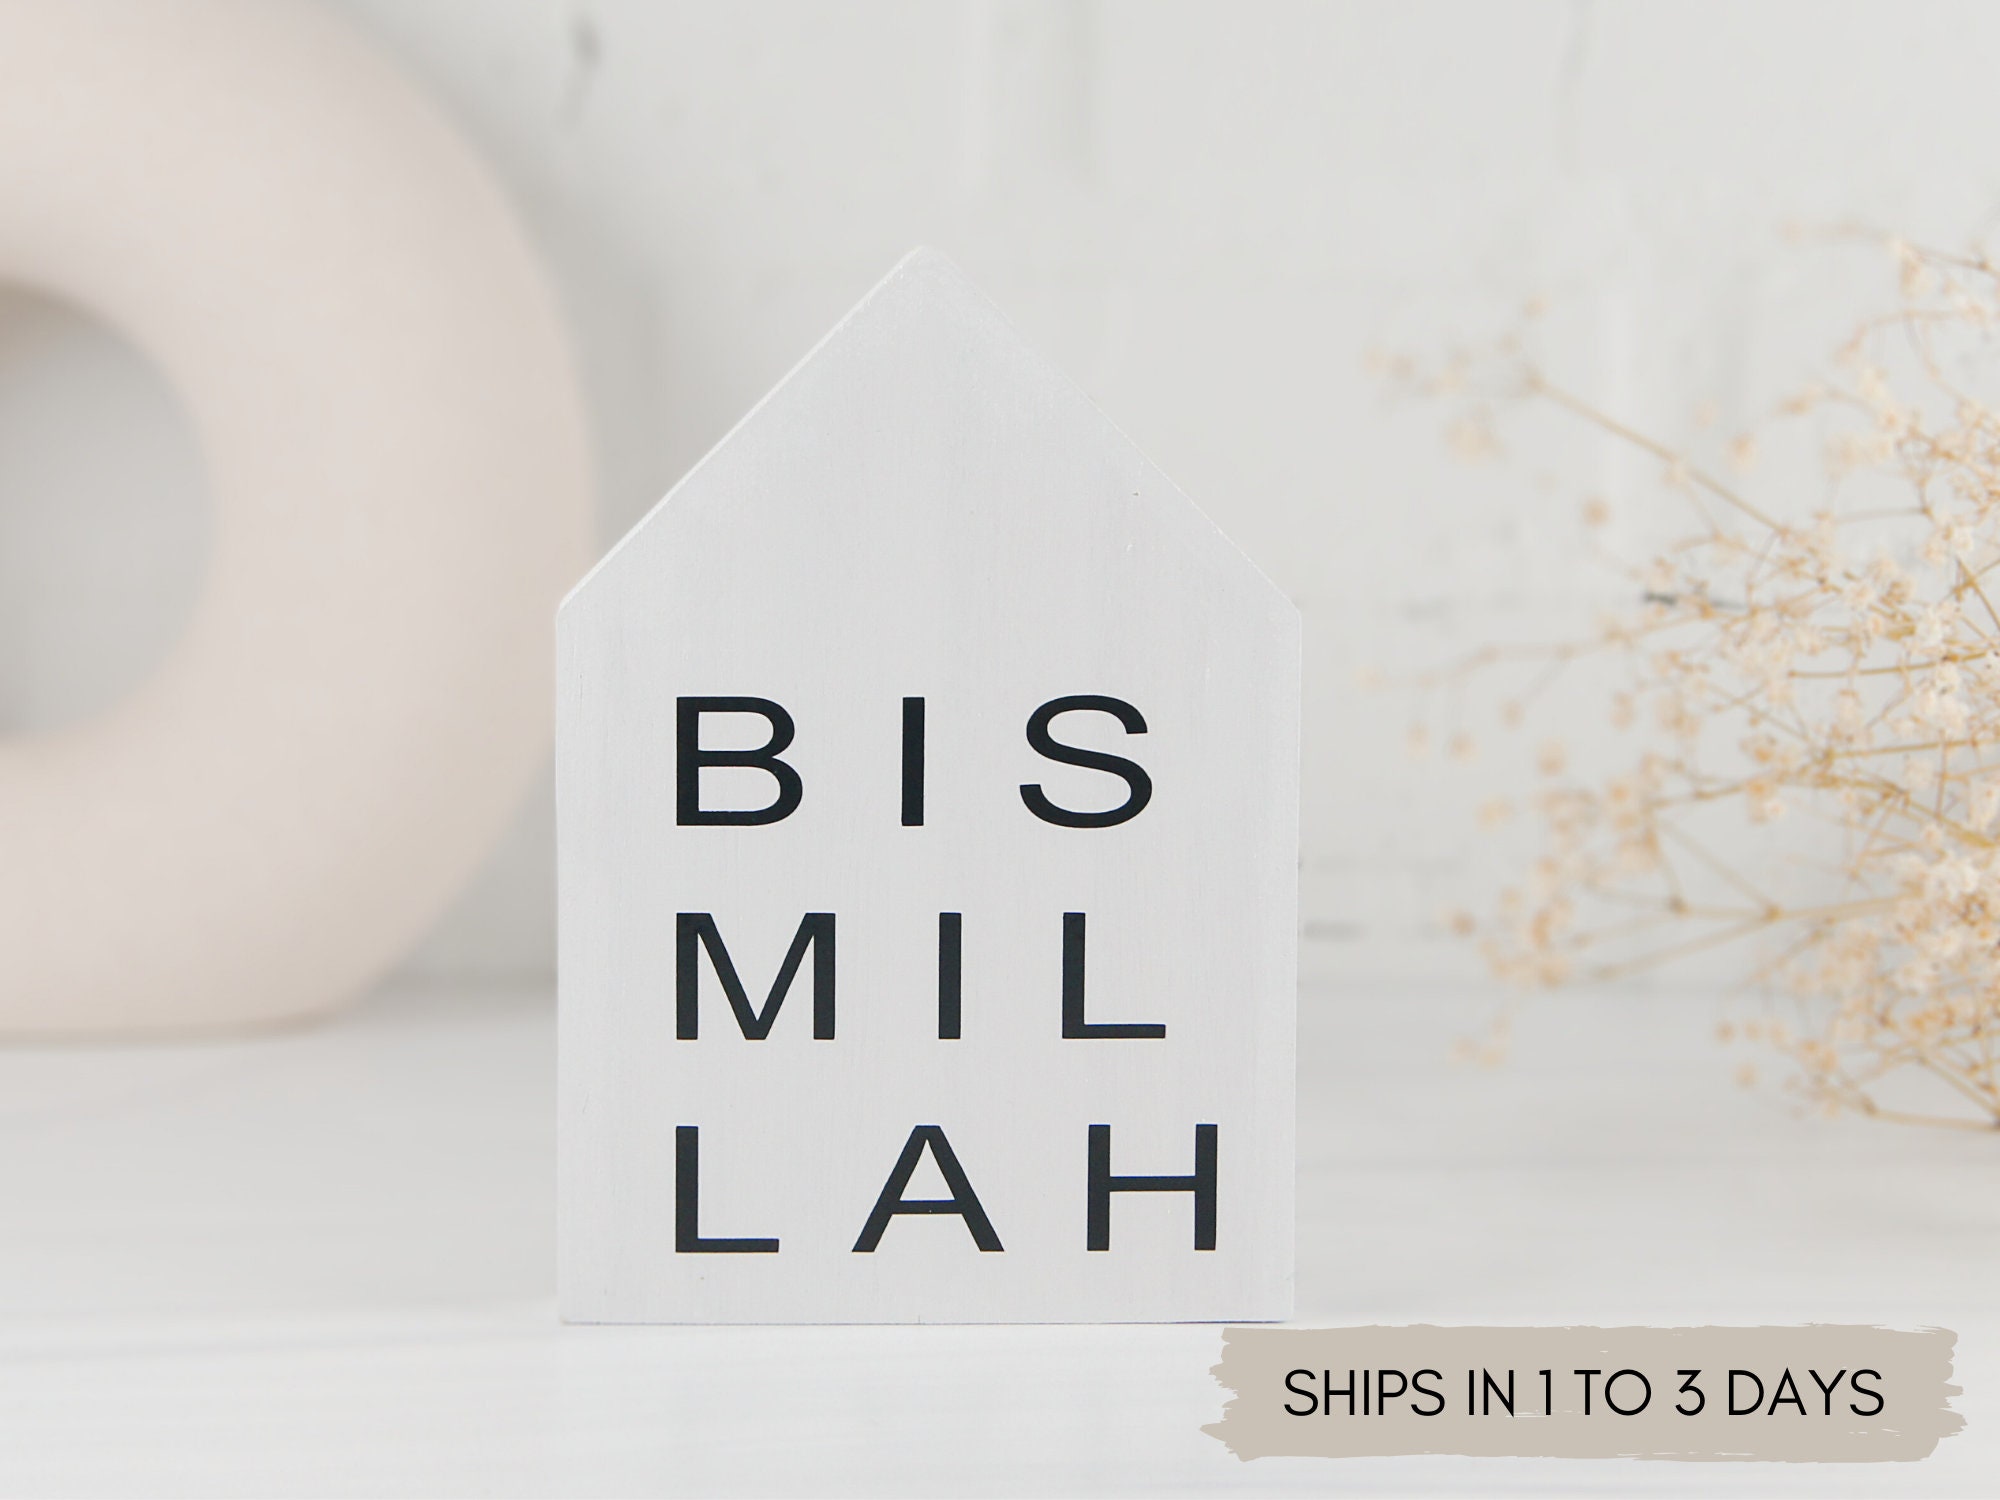 Start with Bismillah, End with Alhamdulillah Stainless Steel Water Bot –  The One Deen